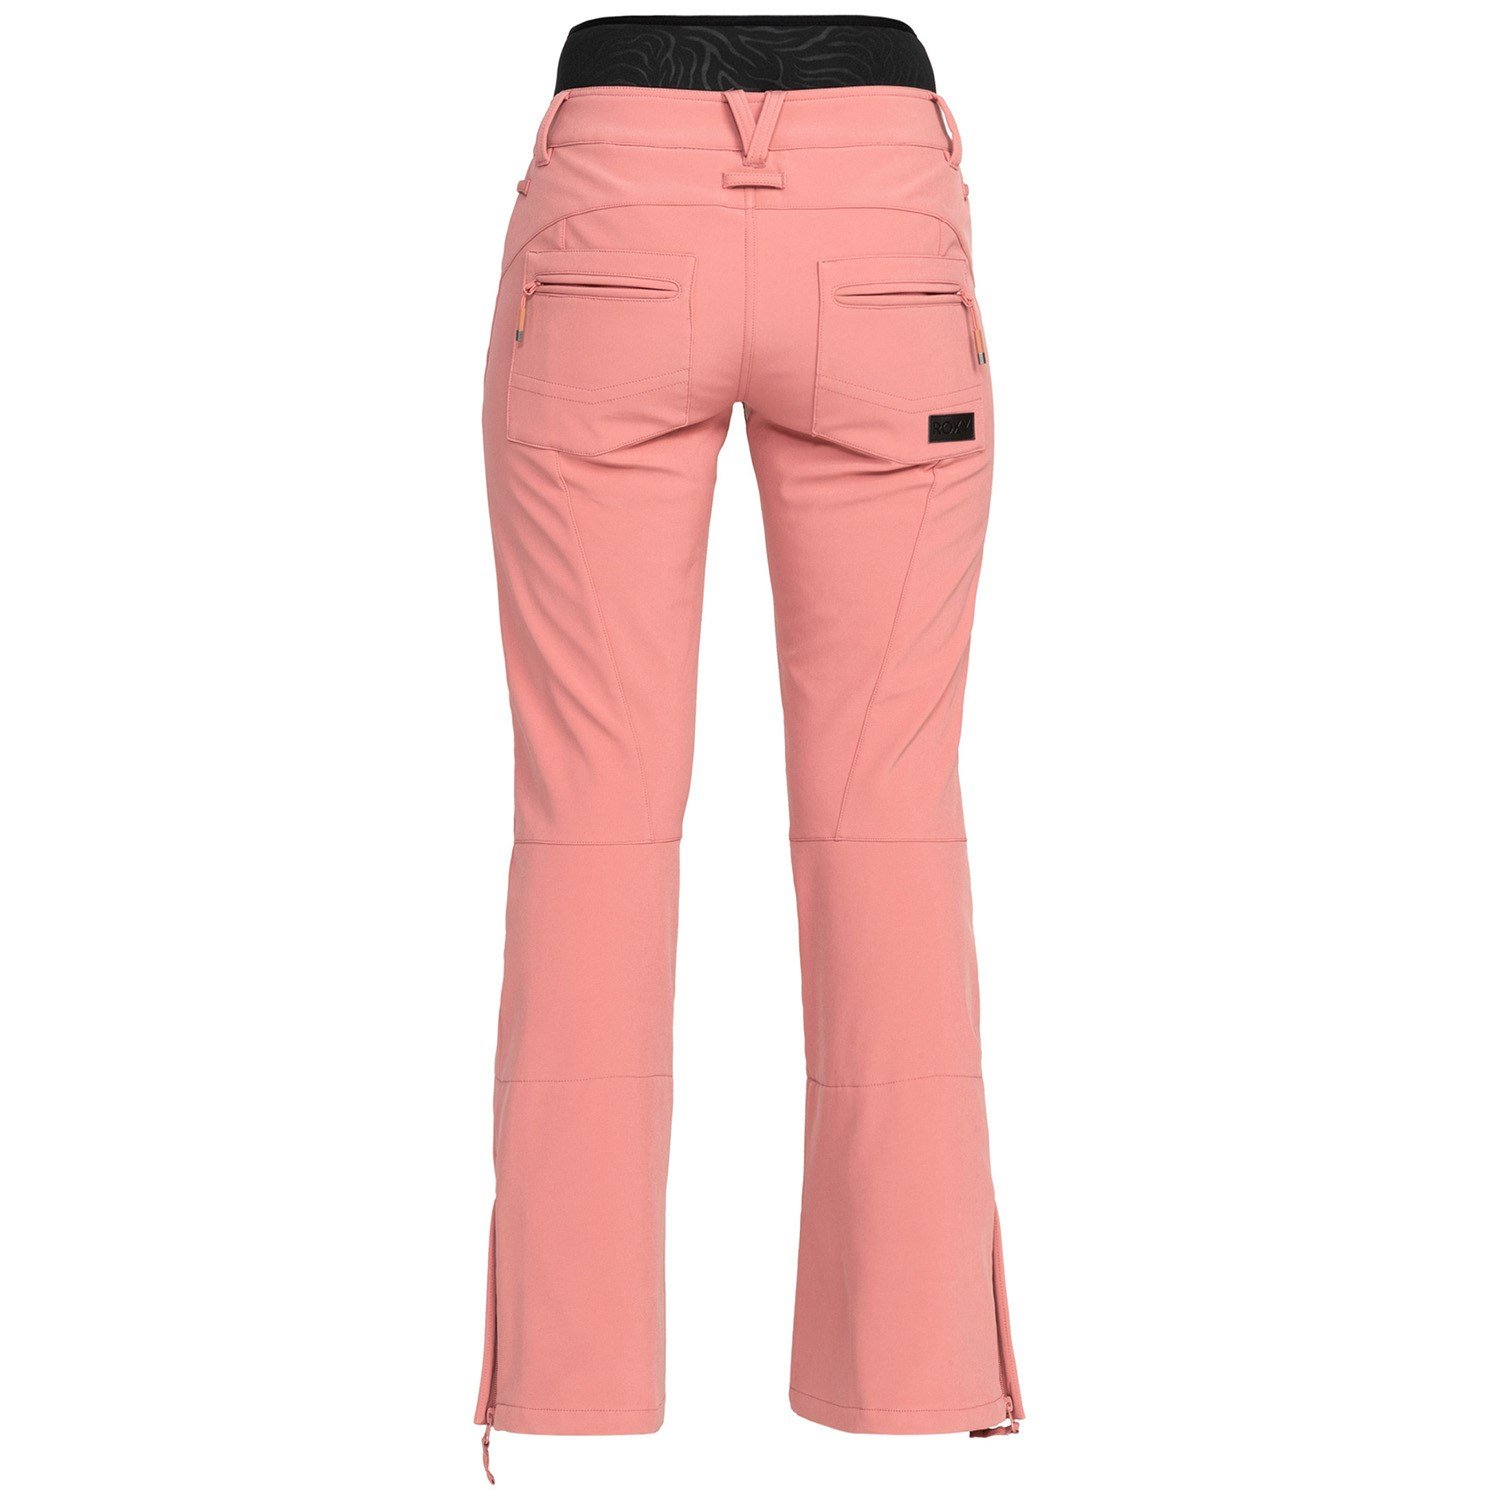 Rising High - Insulated Snow Pants for Women